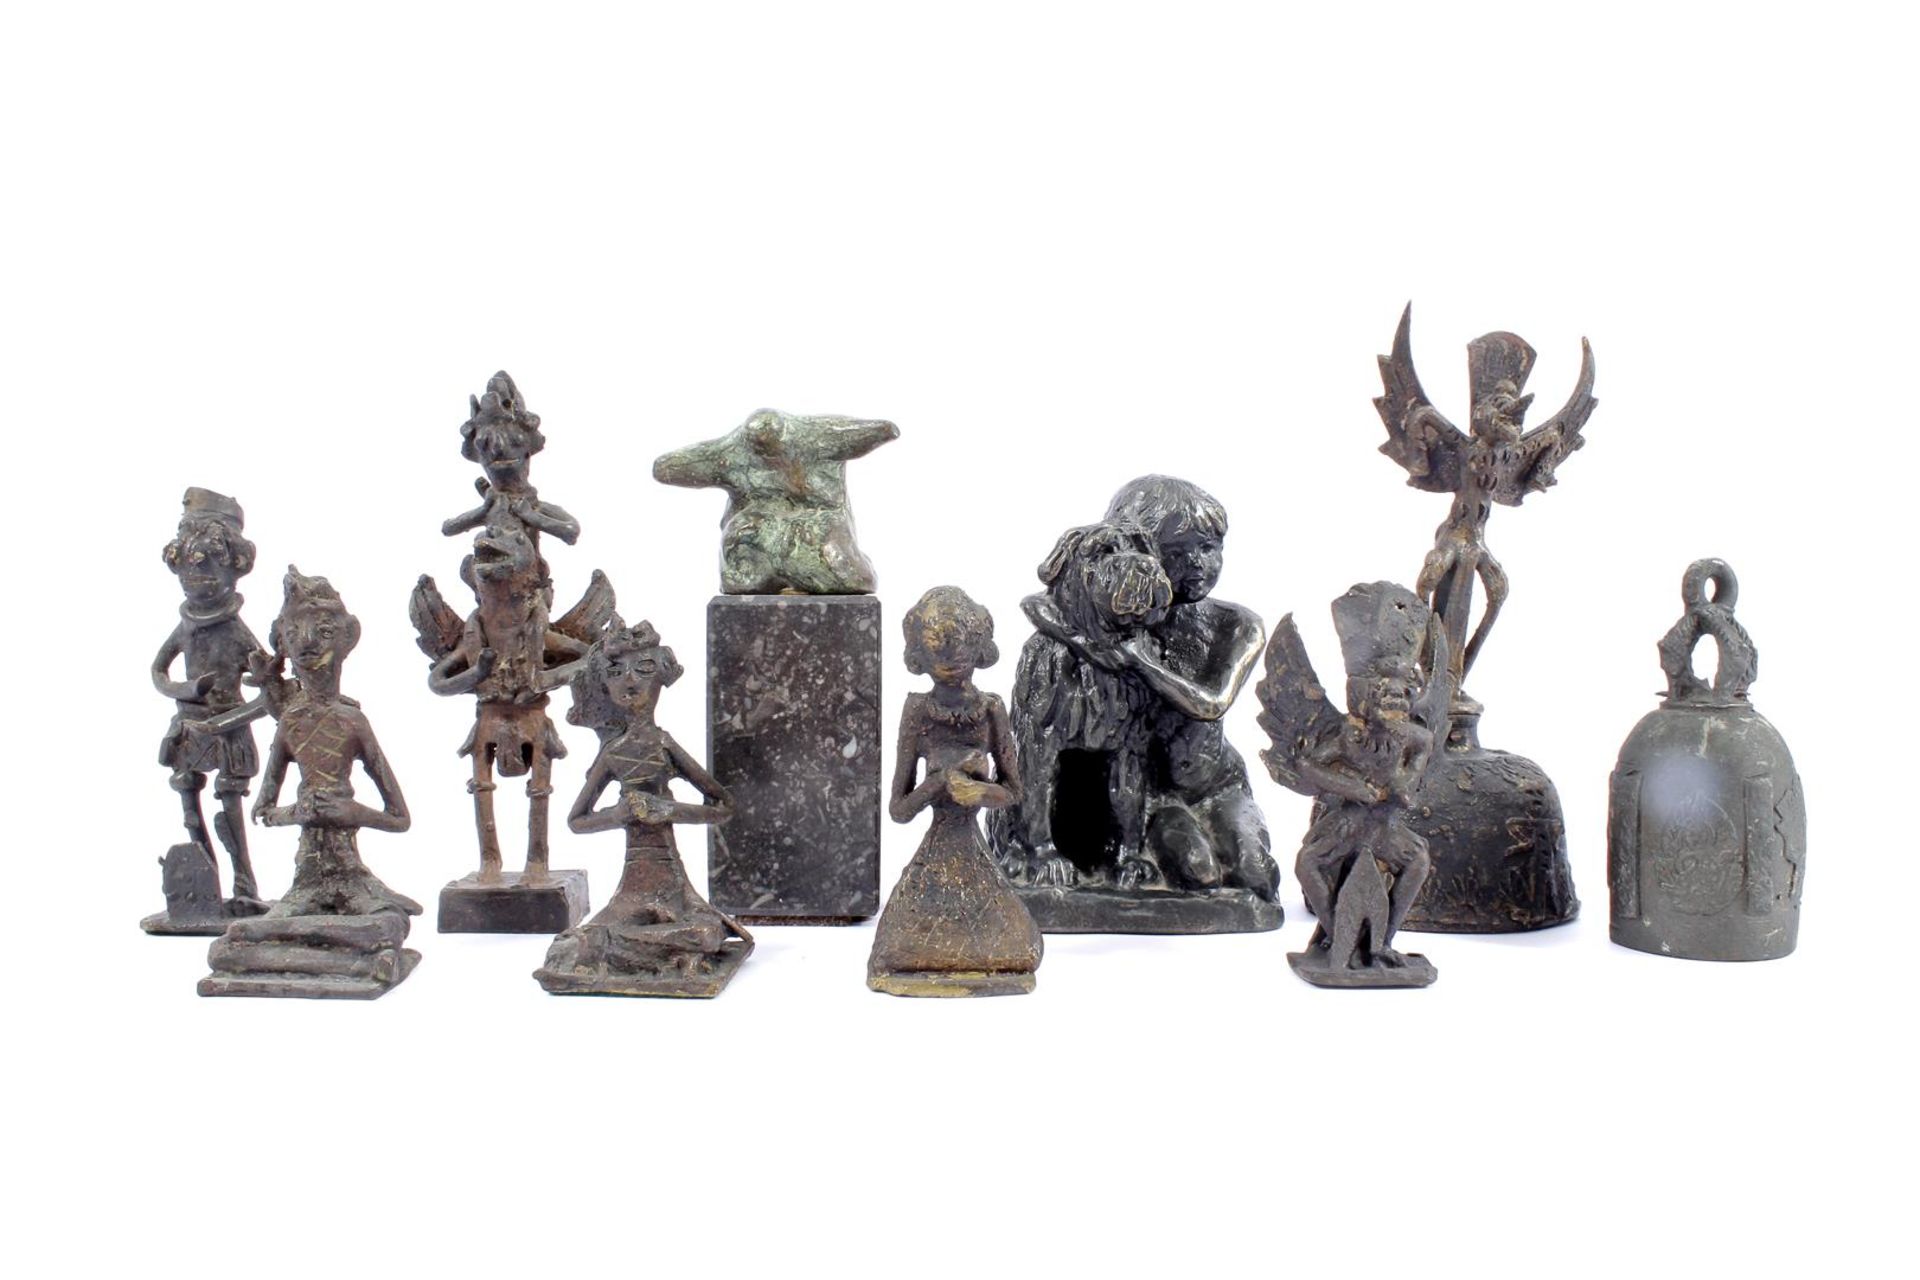 6 Asian bronze figurines 7.5-12.5 cm high, 2 table bells 8 cm and 13.5 cm high, anonymous, bronze